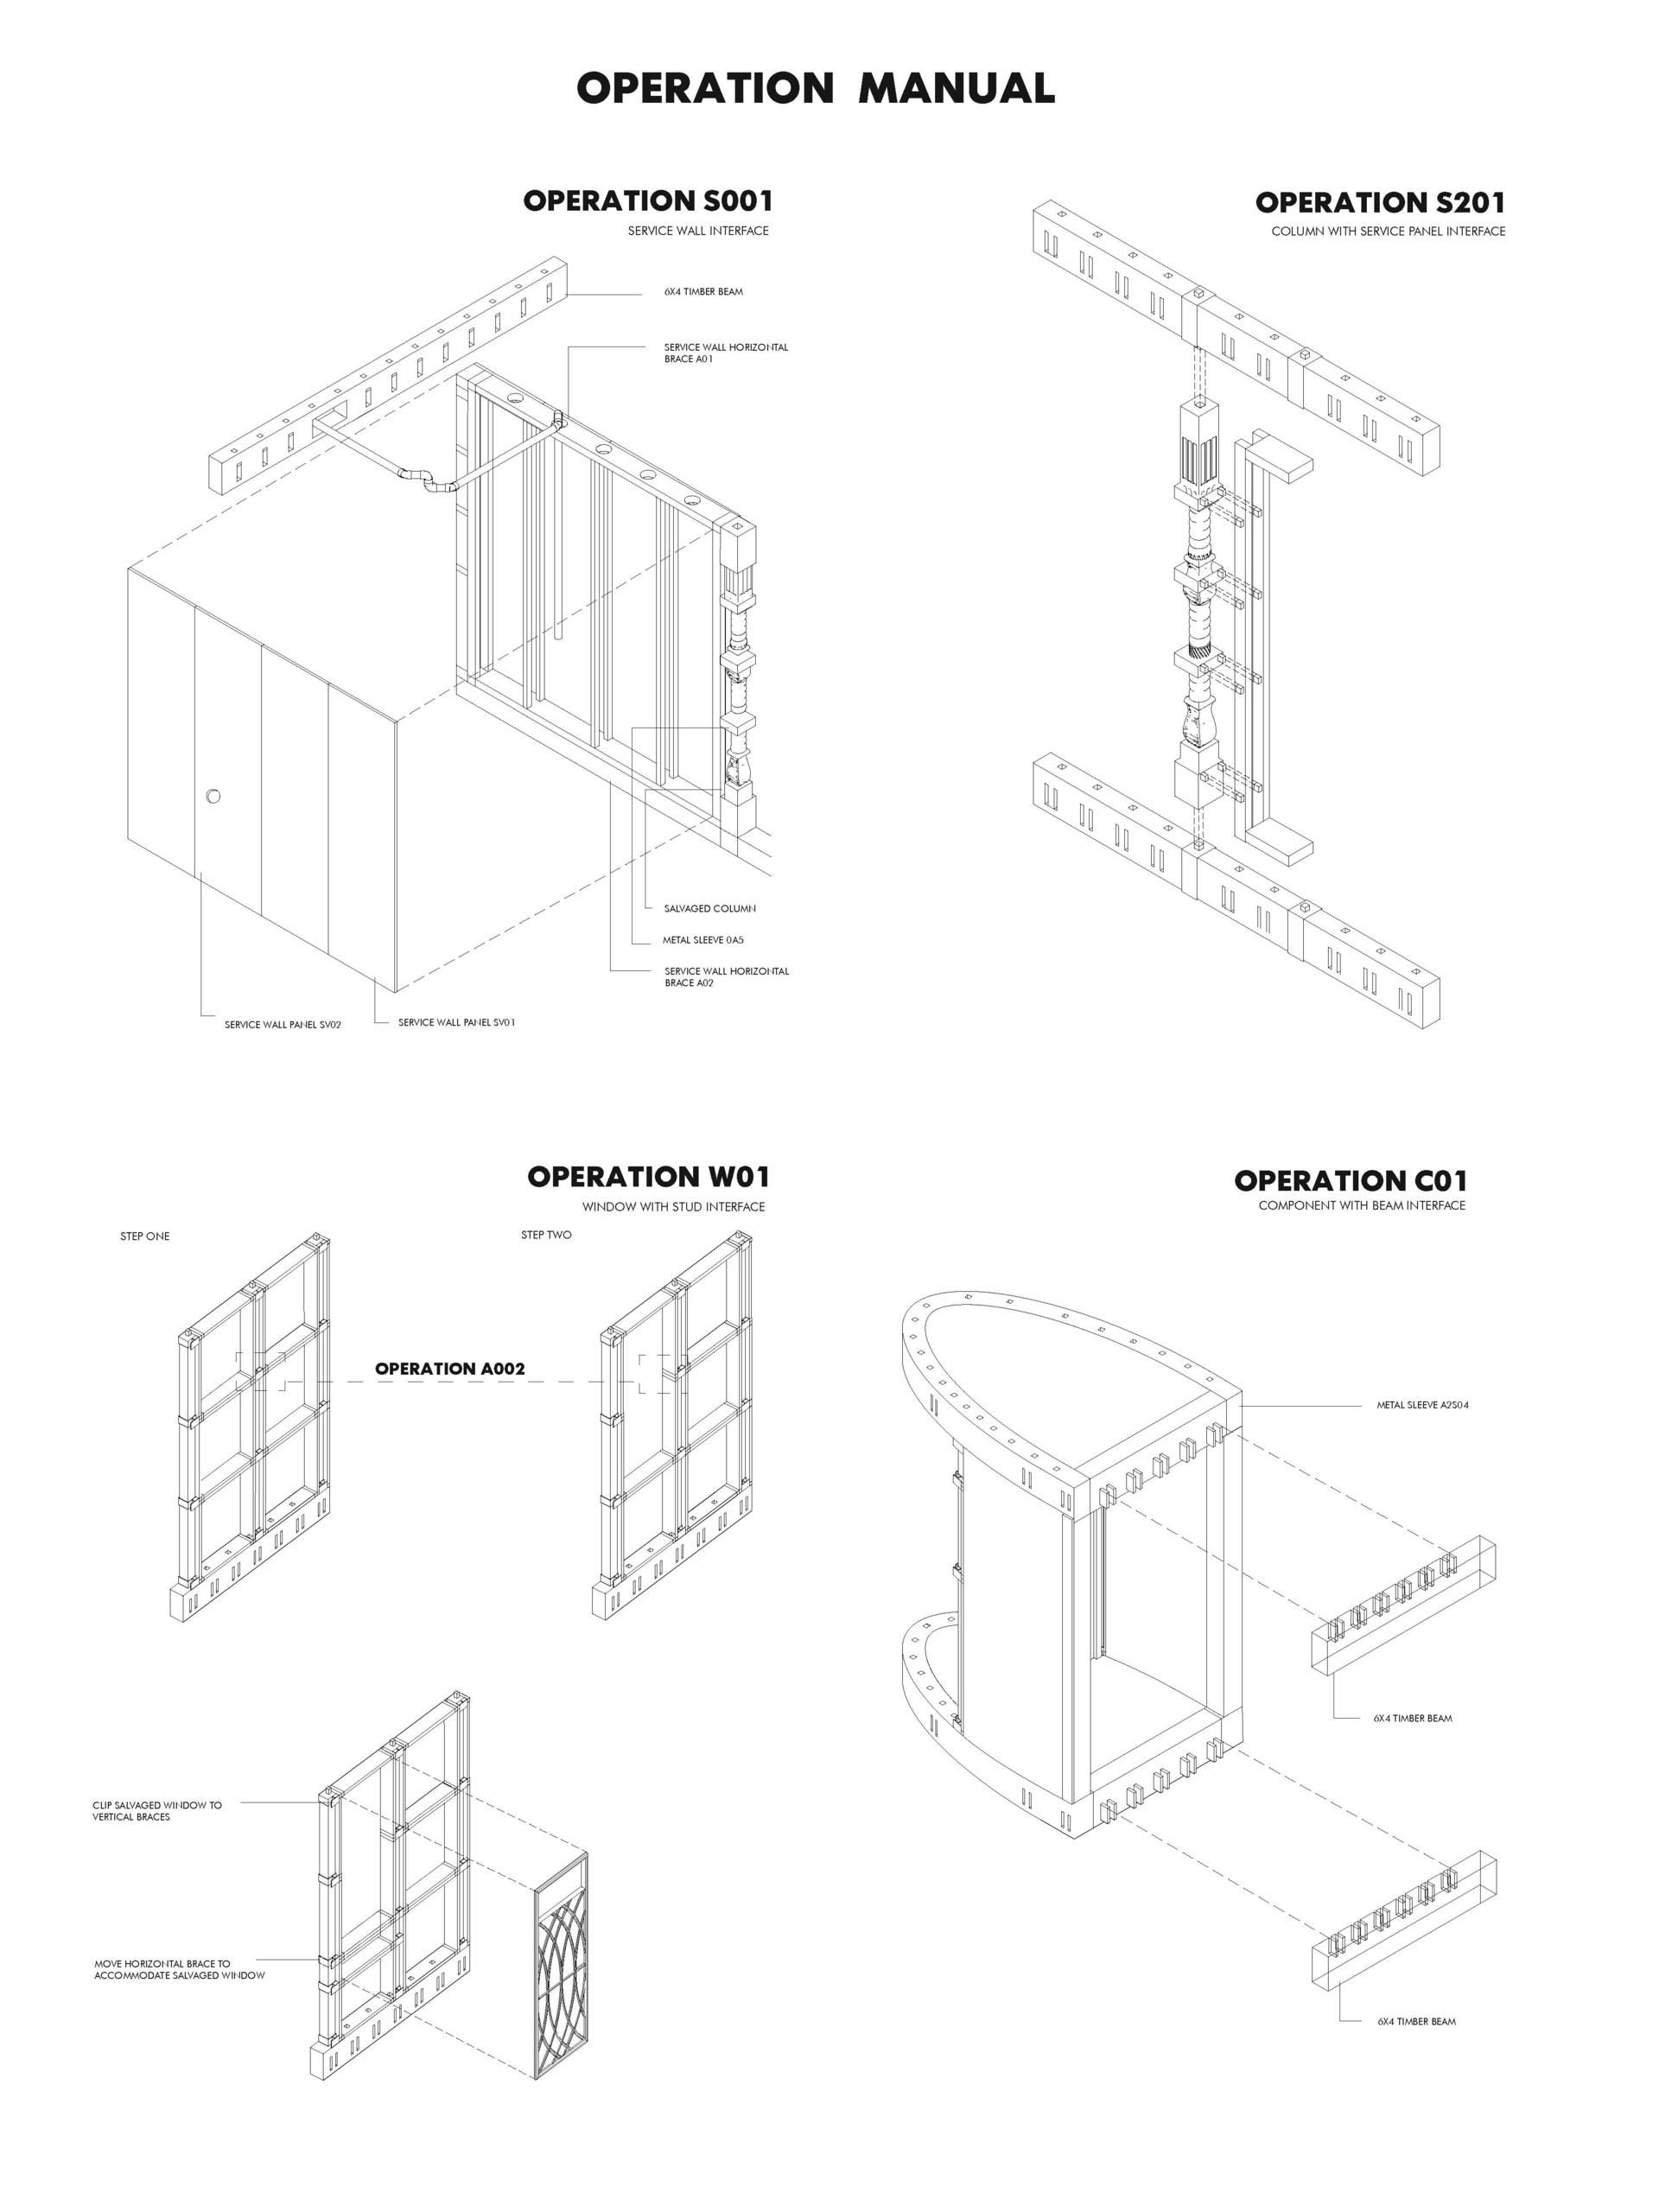 Manual for reversible building operations